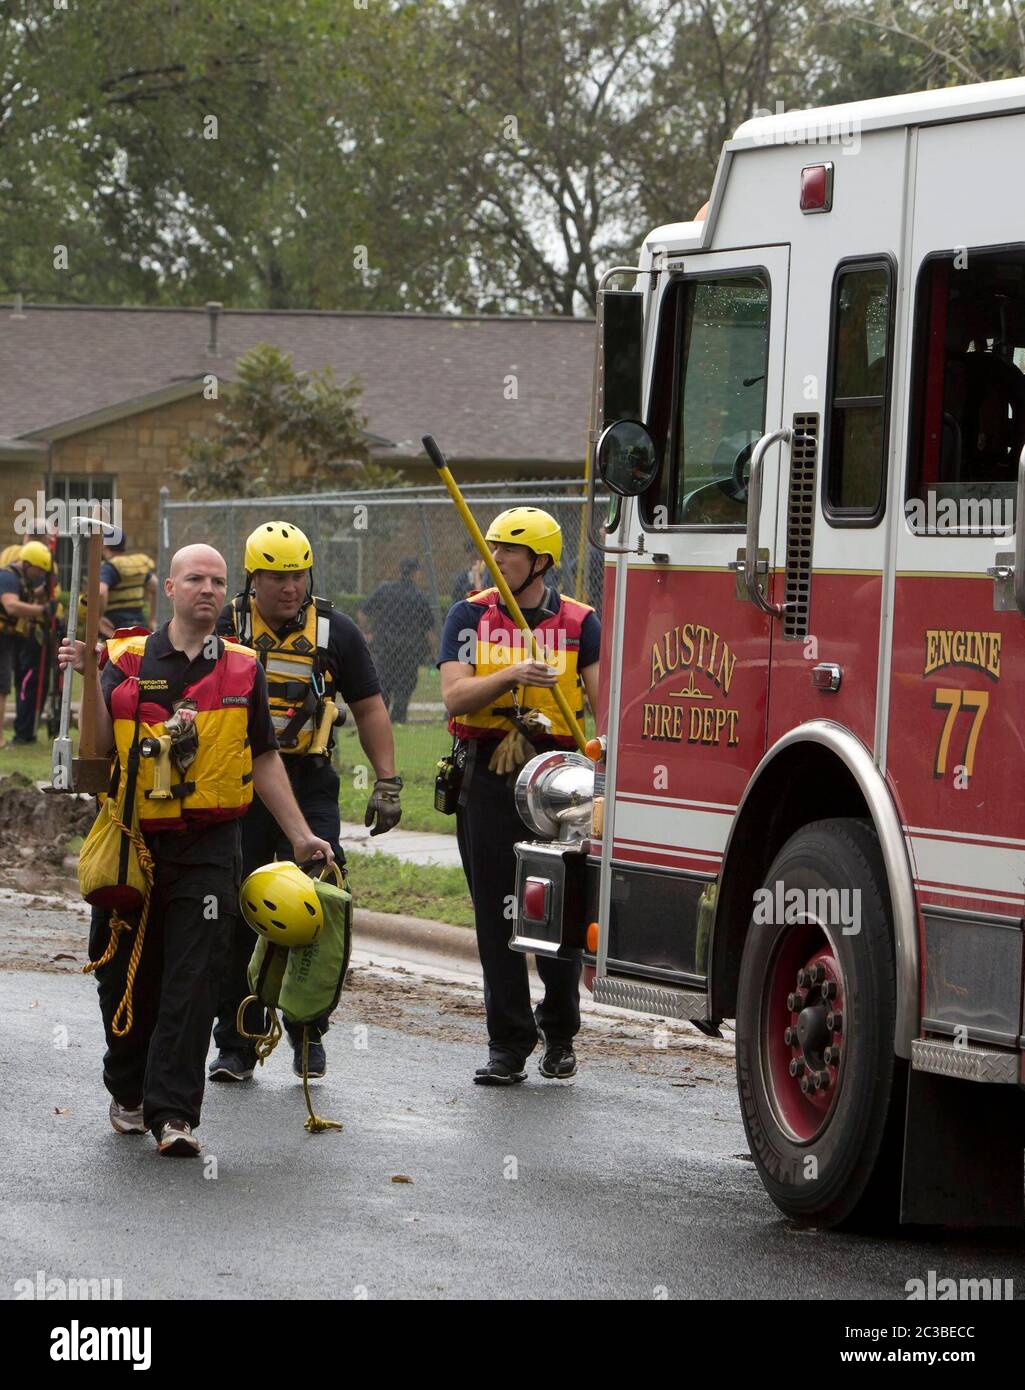 Austin, Texas USA, October 30 2015: Emergency workers including  firefighters  prepare to help or rescue residents from high water in the Onion Creek neighborhood. The creek flooded earlier in the day after the area received more than 11 inches of rain since midnight.  ©Marjorie Kamys Cotera/Daemmrich Photography Stock Photo